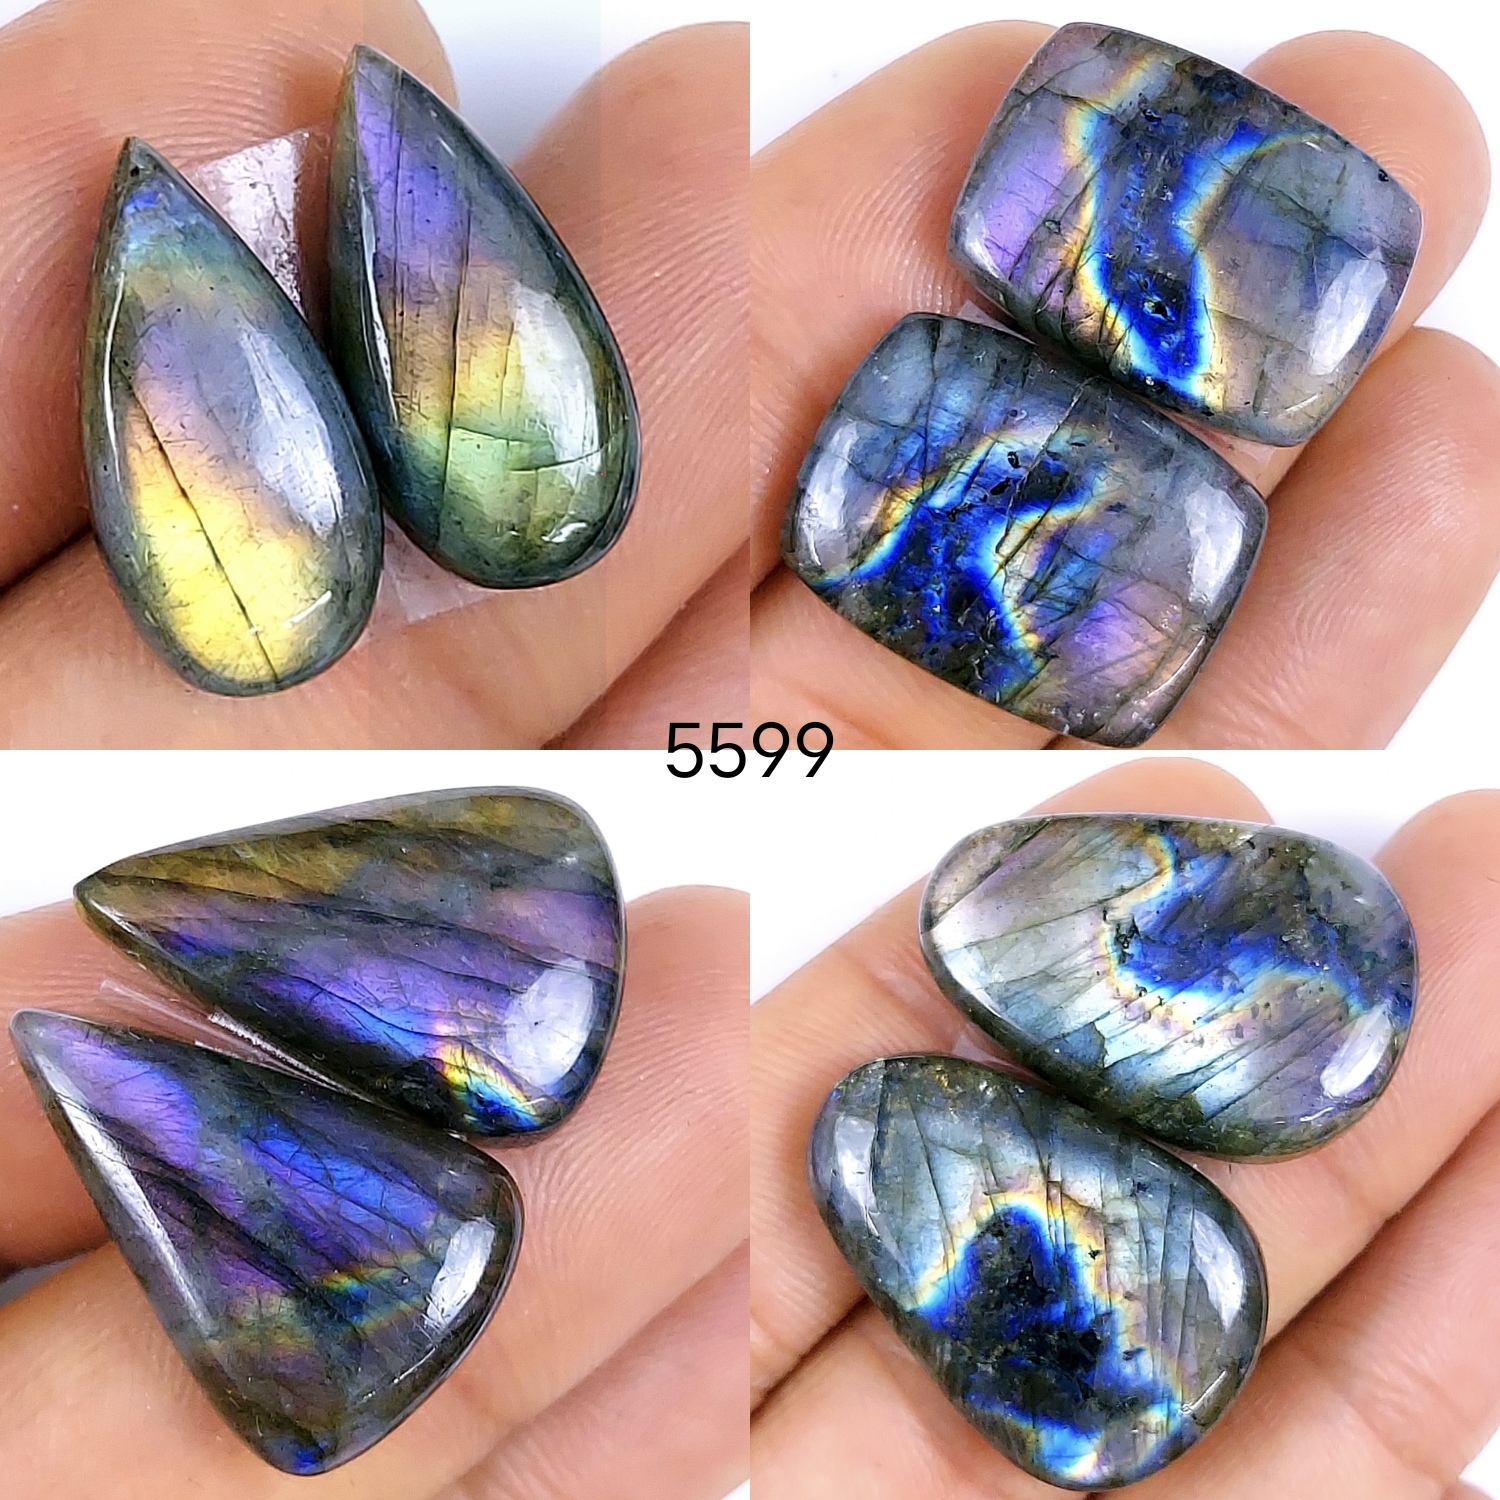 4 pair Lot 158Cts Natural Labradorite cabochon Gemstone Multi fire labradorite Matching pair For Jewelry Making Mix shape and Size Earring Pairs 30x20 20x10mm #5599